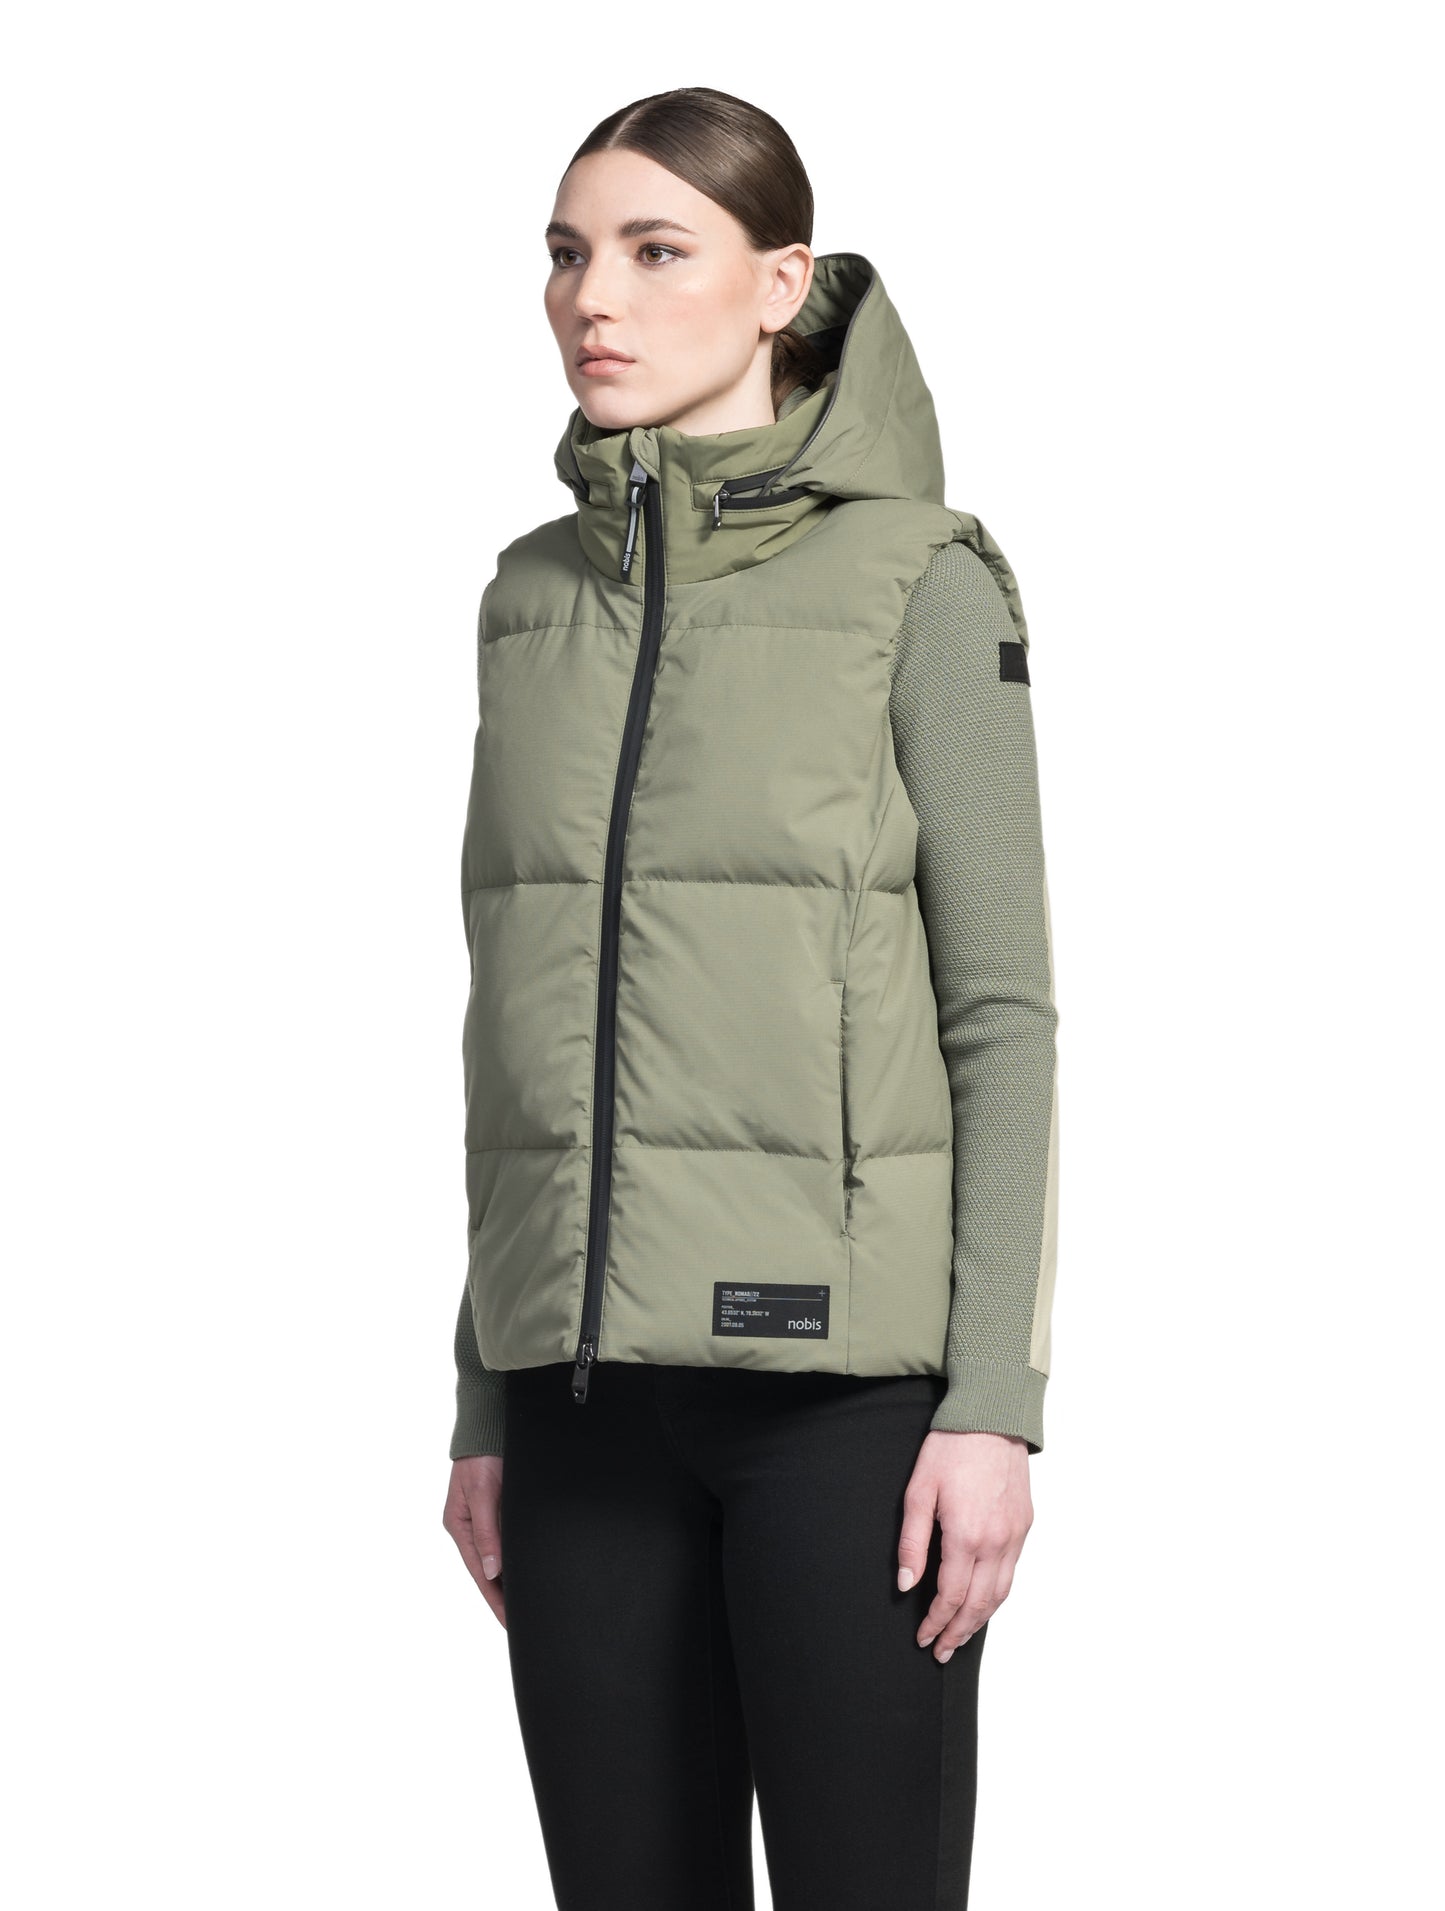 Oren Ladies Performance Vest in hip length, Durable Stretch Ripstop and 3-Ply Micro Denier fabrication, Premium Canadian White Duck Down insulation, tuck-away waterproof hood, and two-way centre front zipper, in Clover